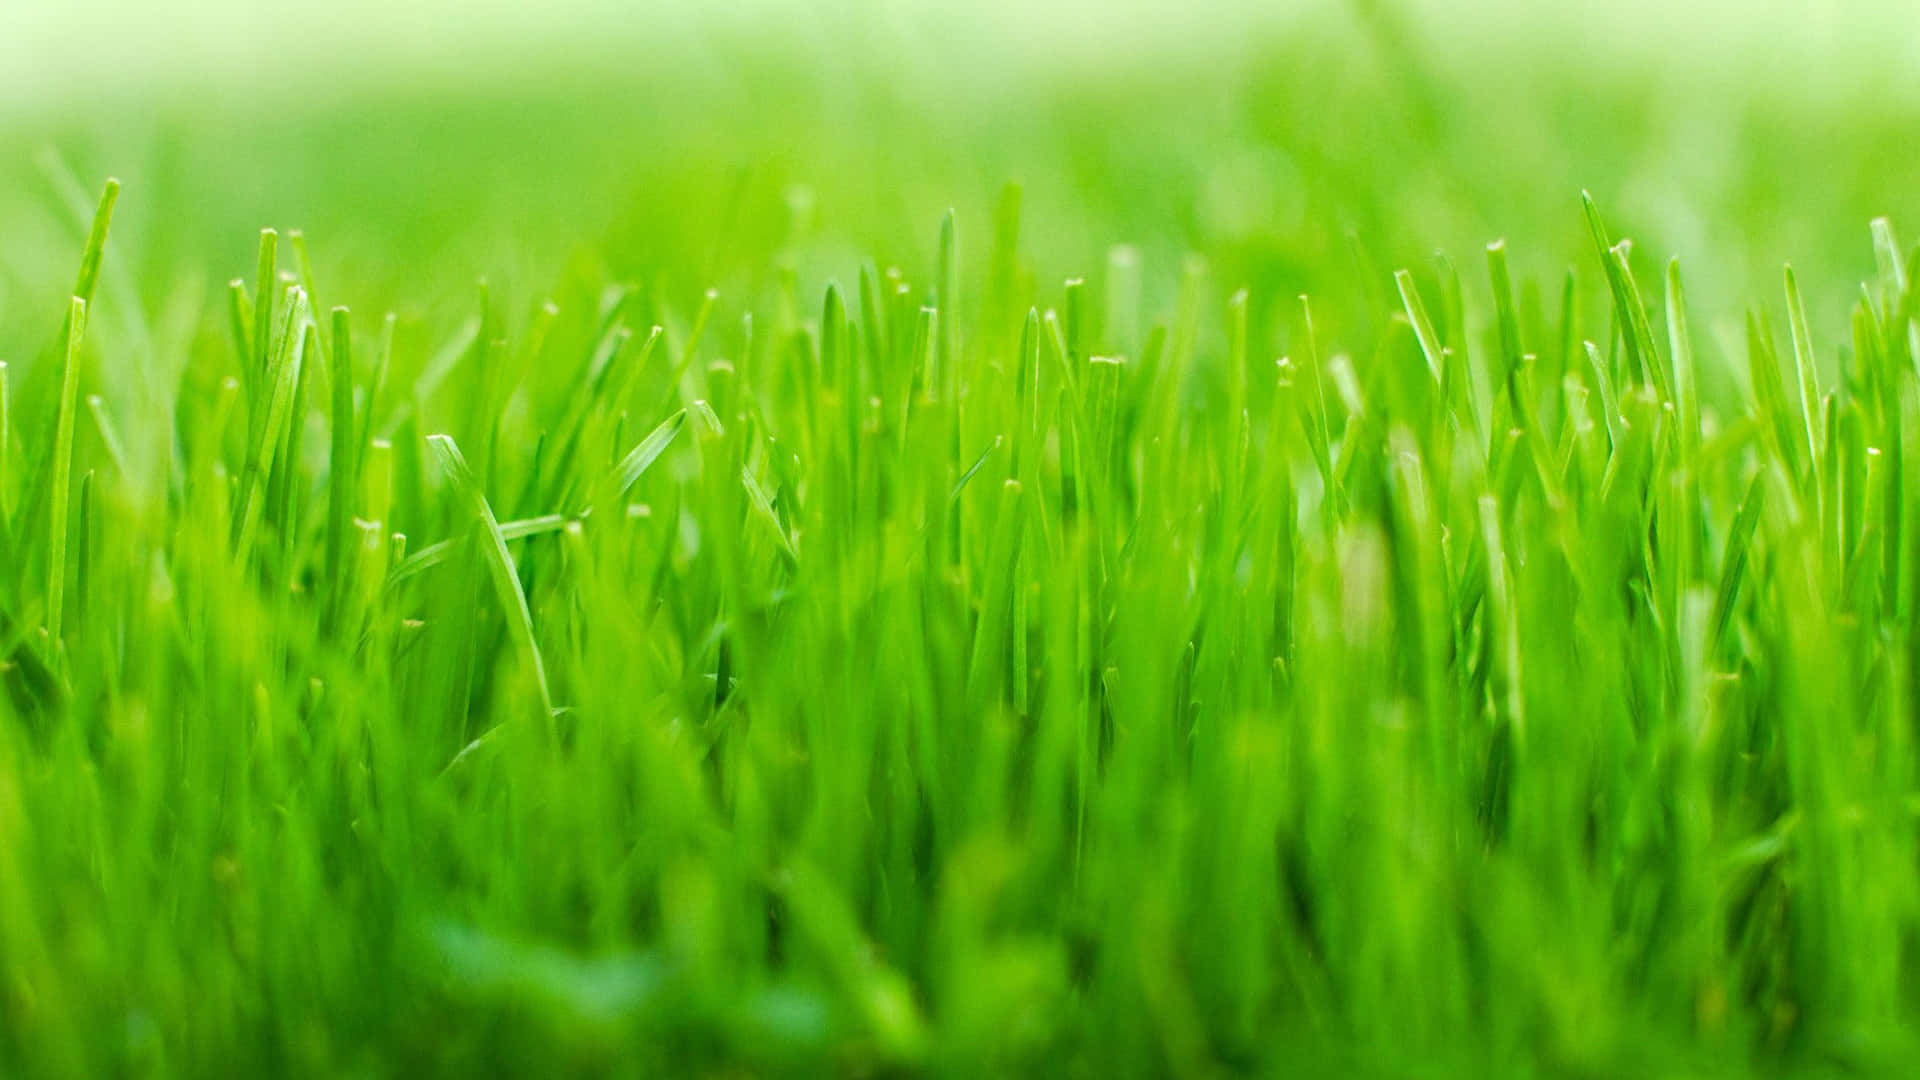 A lush and vibrant green grass background